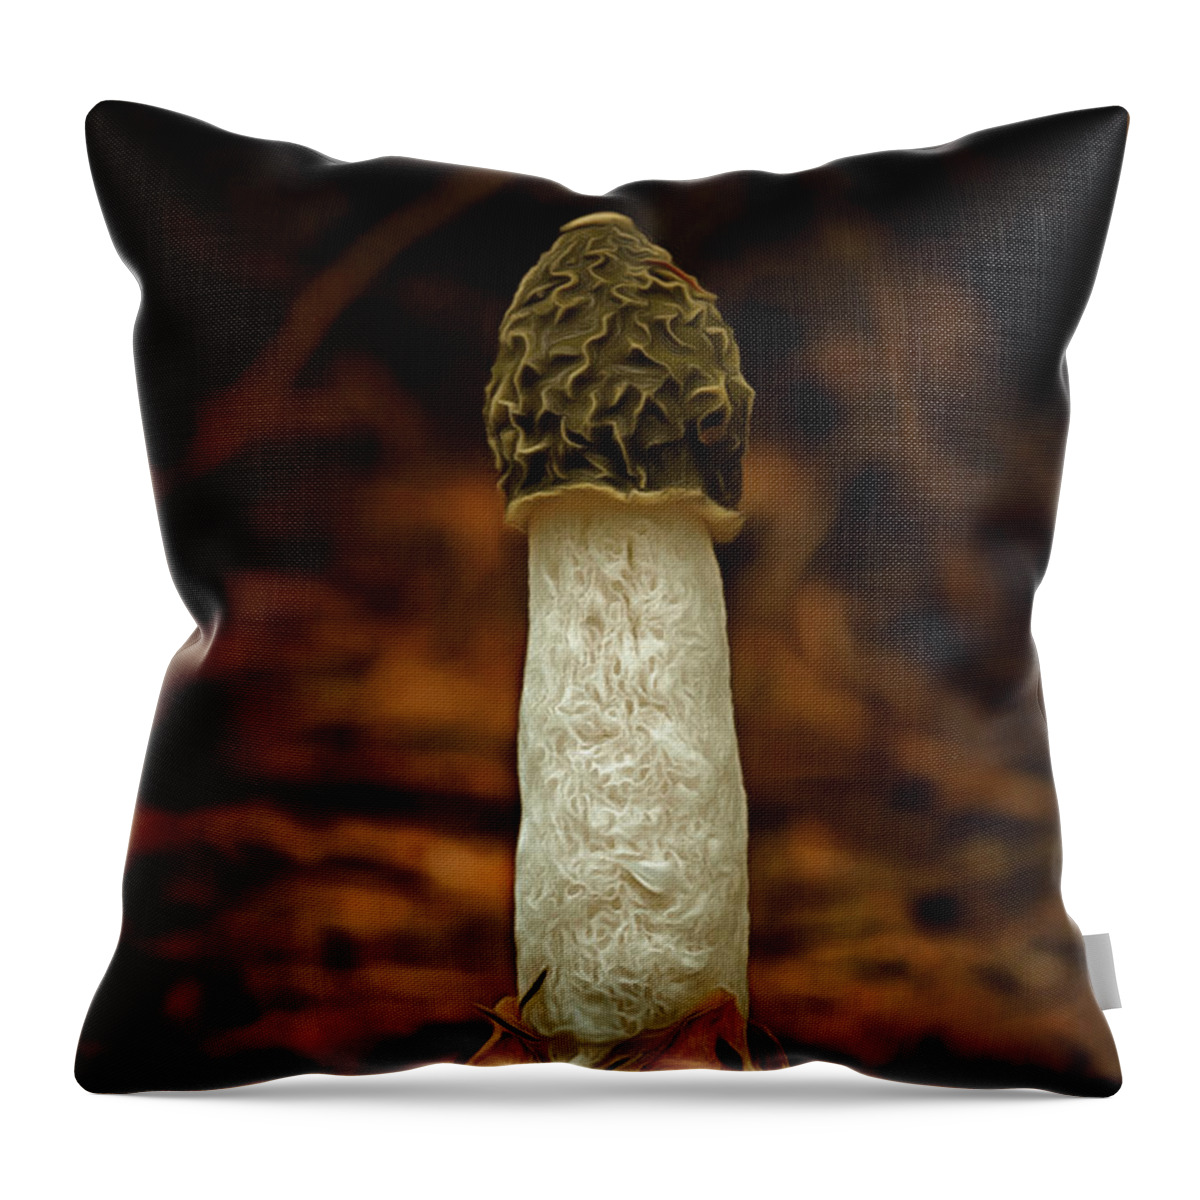 Mushroom Throw Pillow featuring the photograph Phallus Impudicus by Michal Boubin